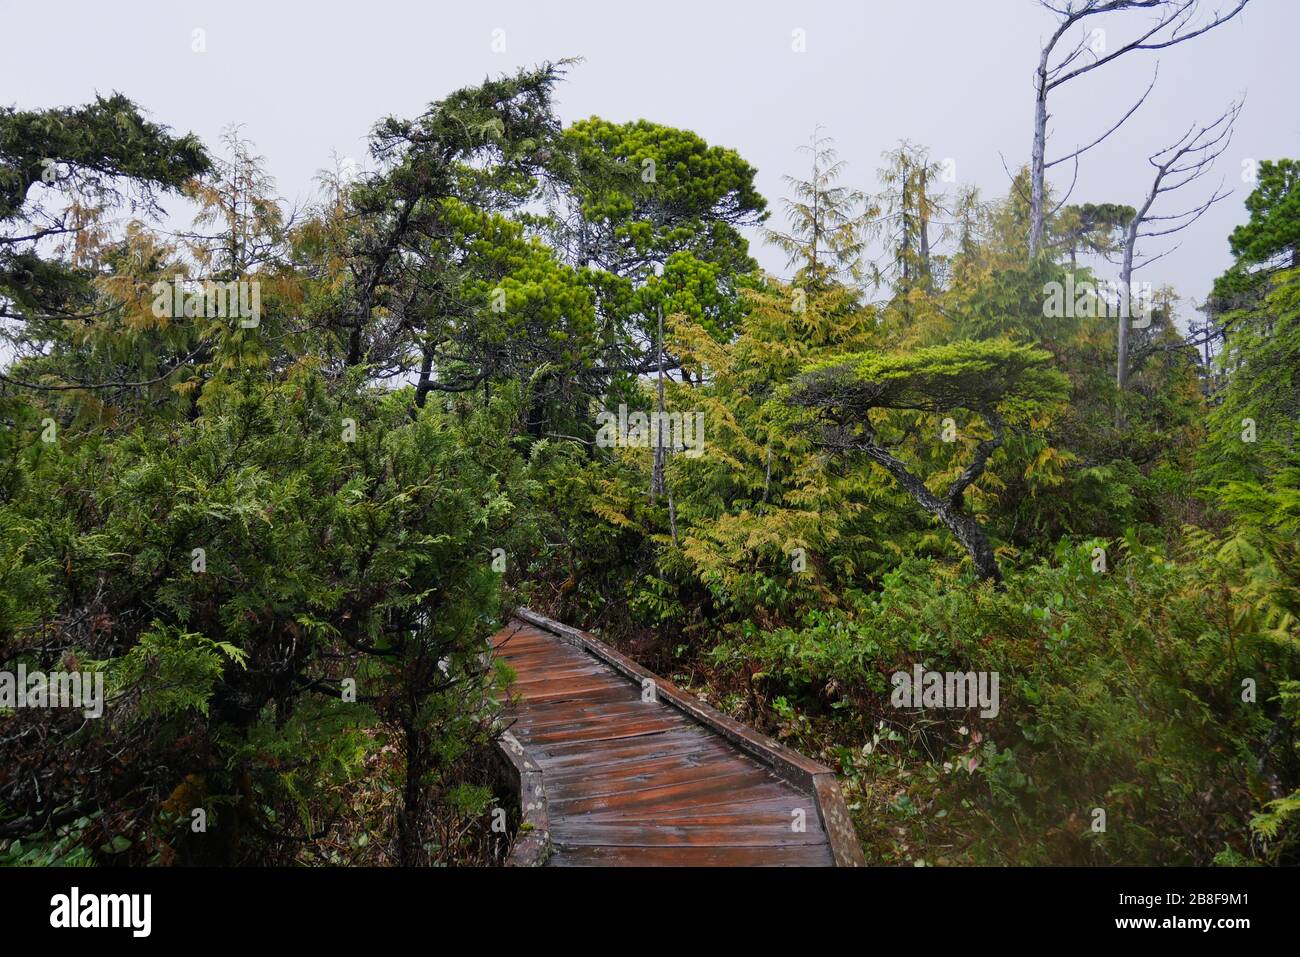 Boardwalk through bog with bright green ancient stunted trees Stock Photo